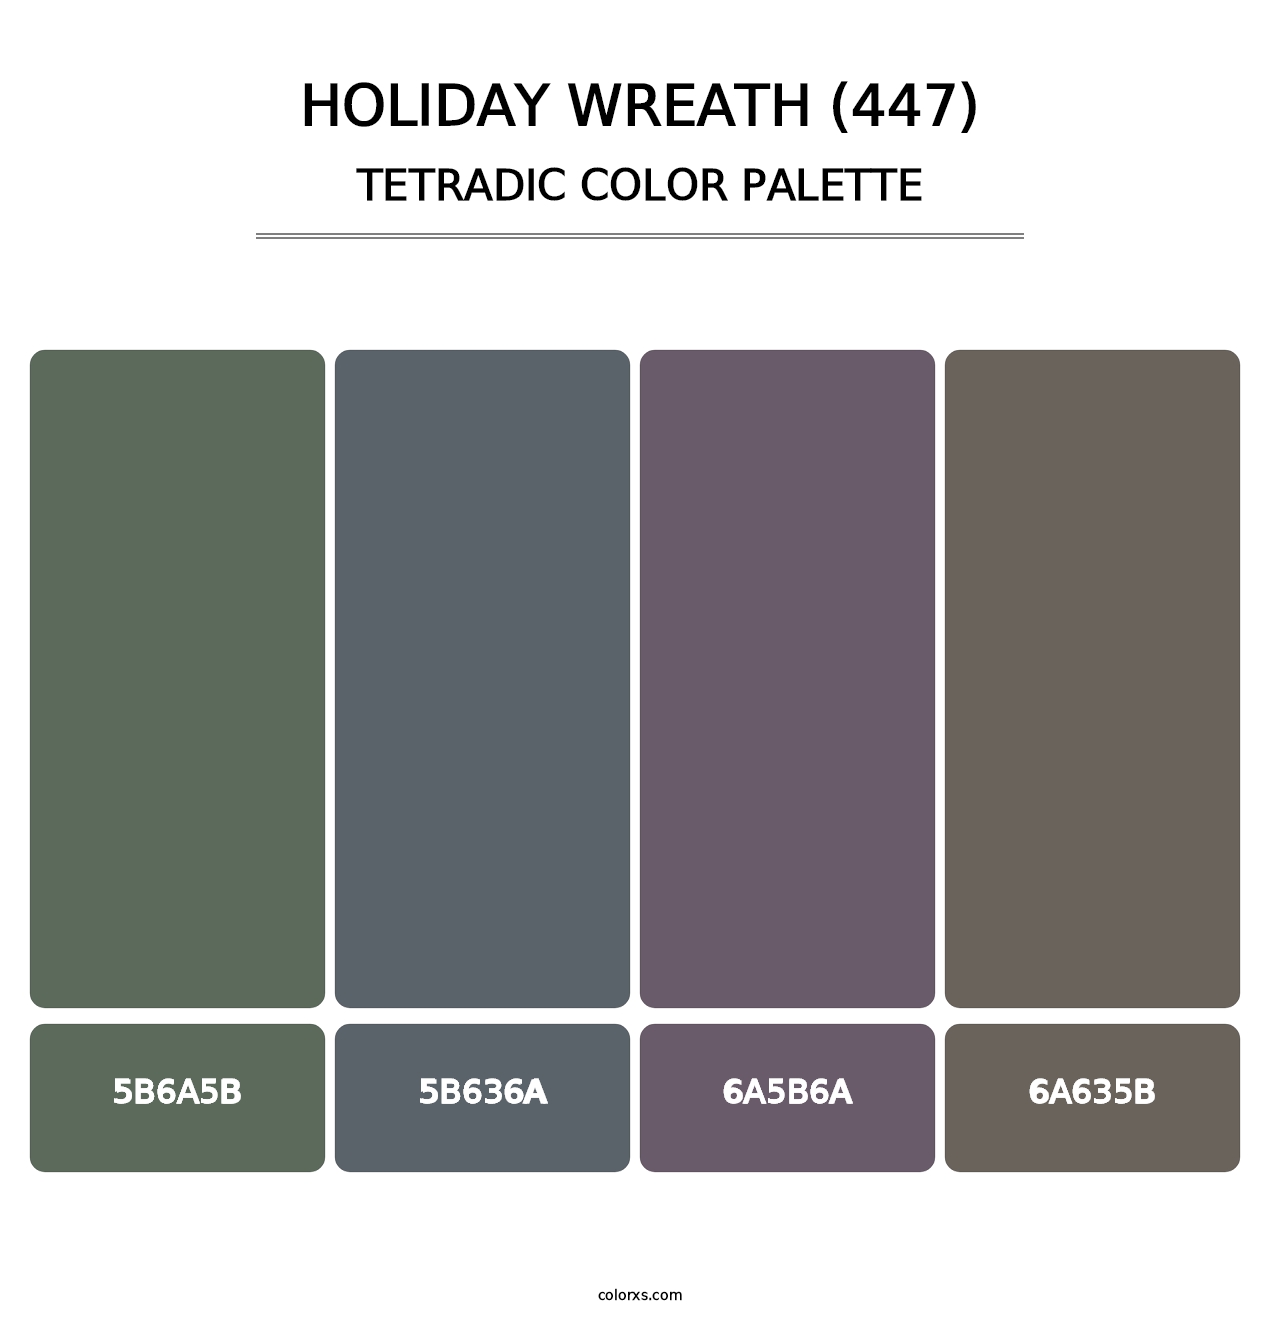 Holiday Wreath (447) - Tetradic Color Palette